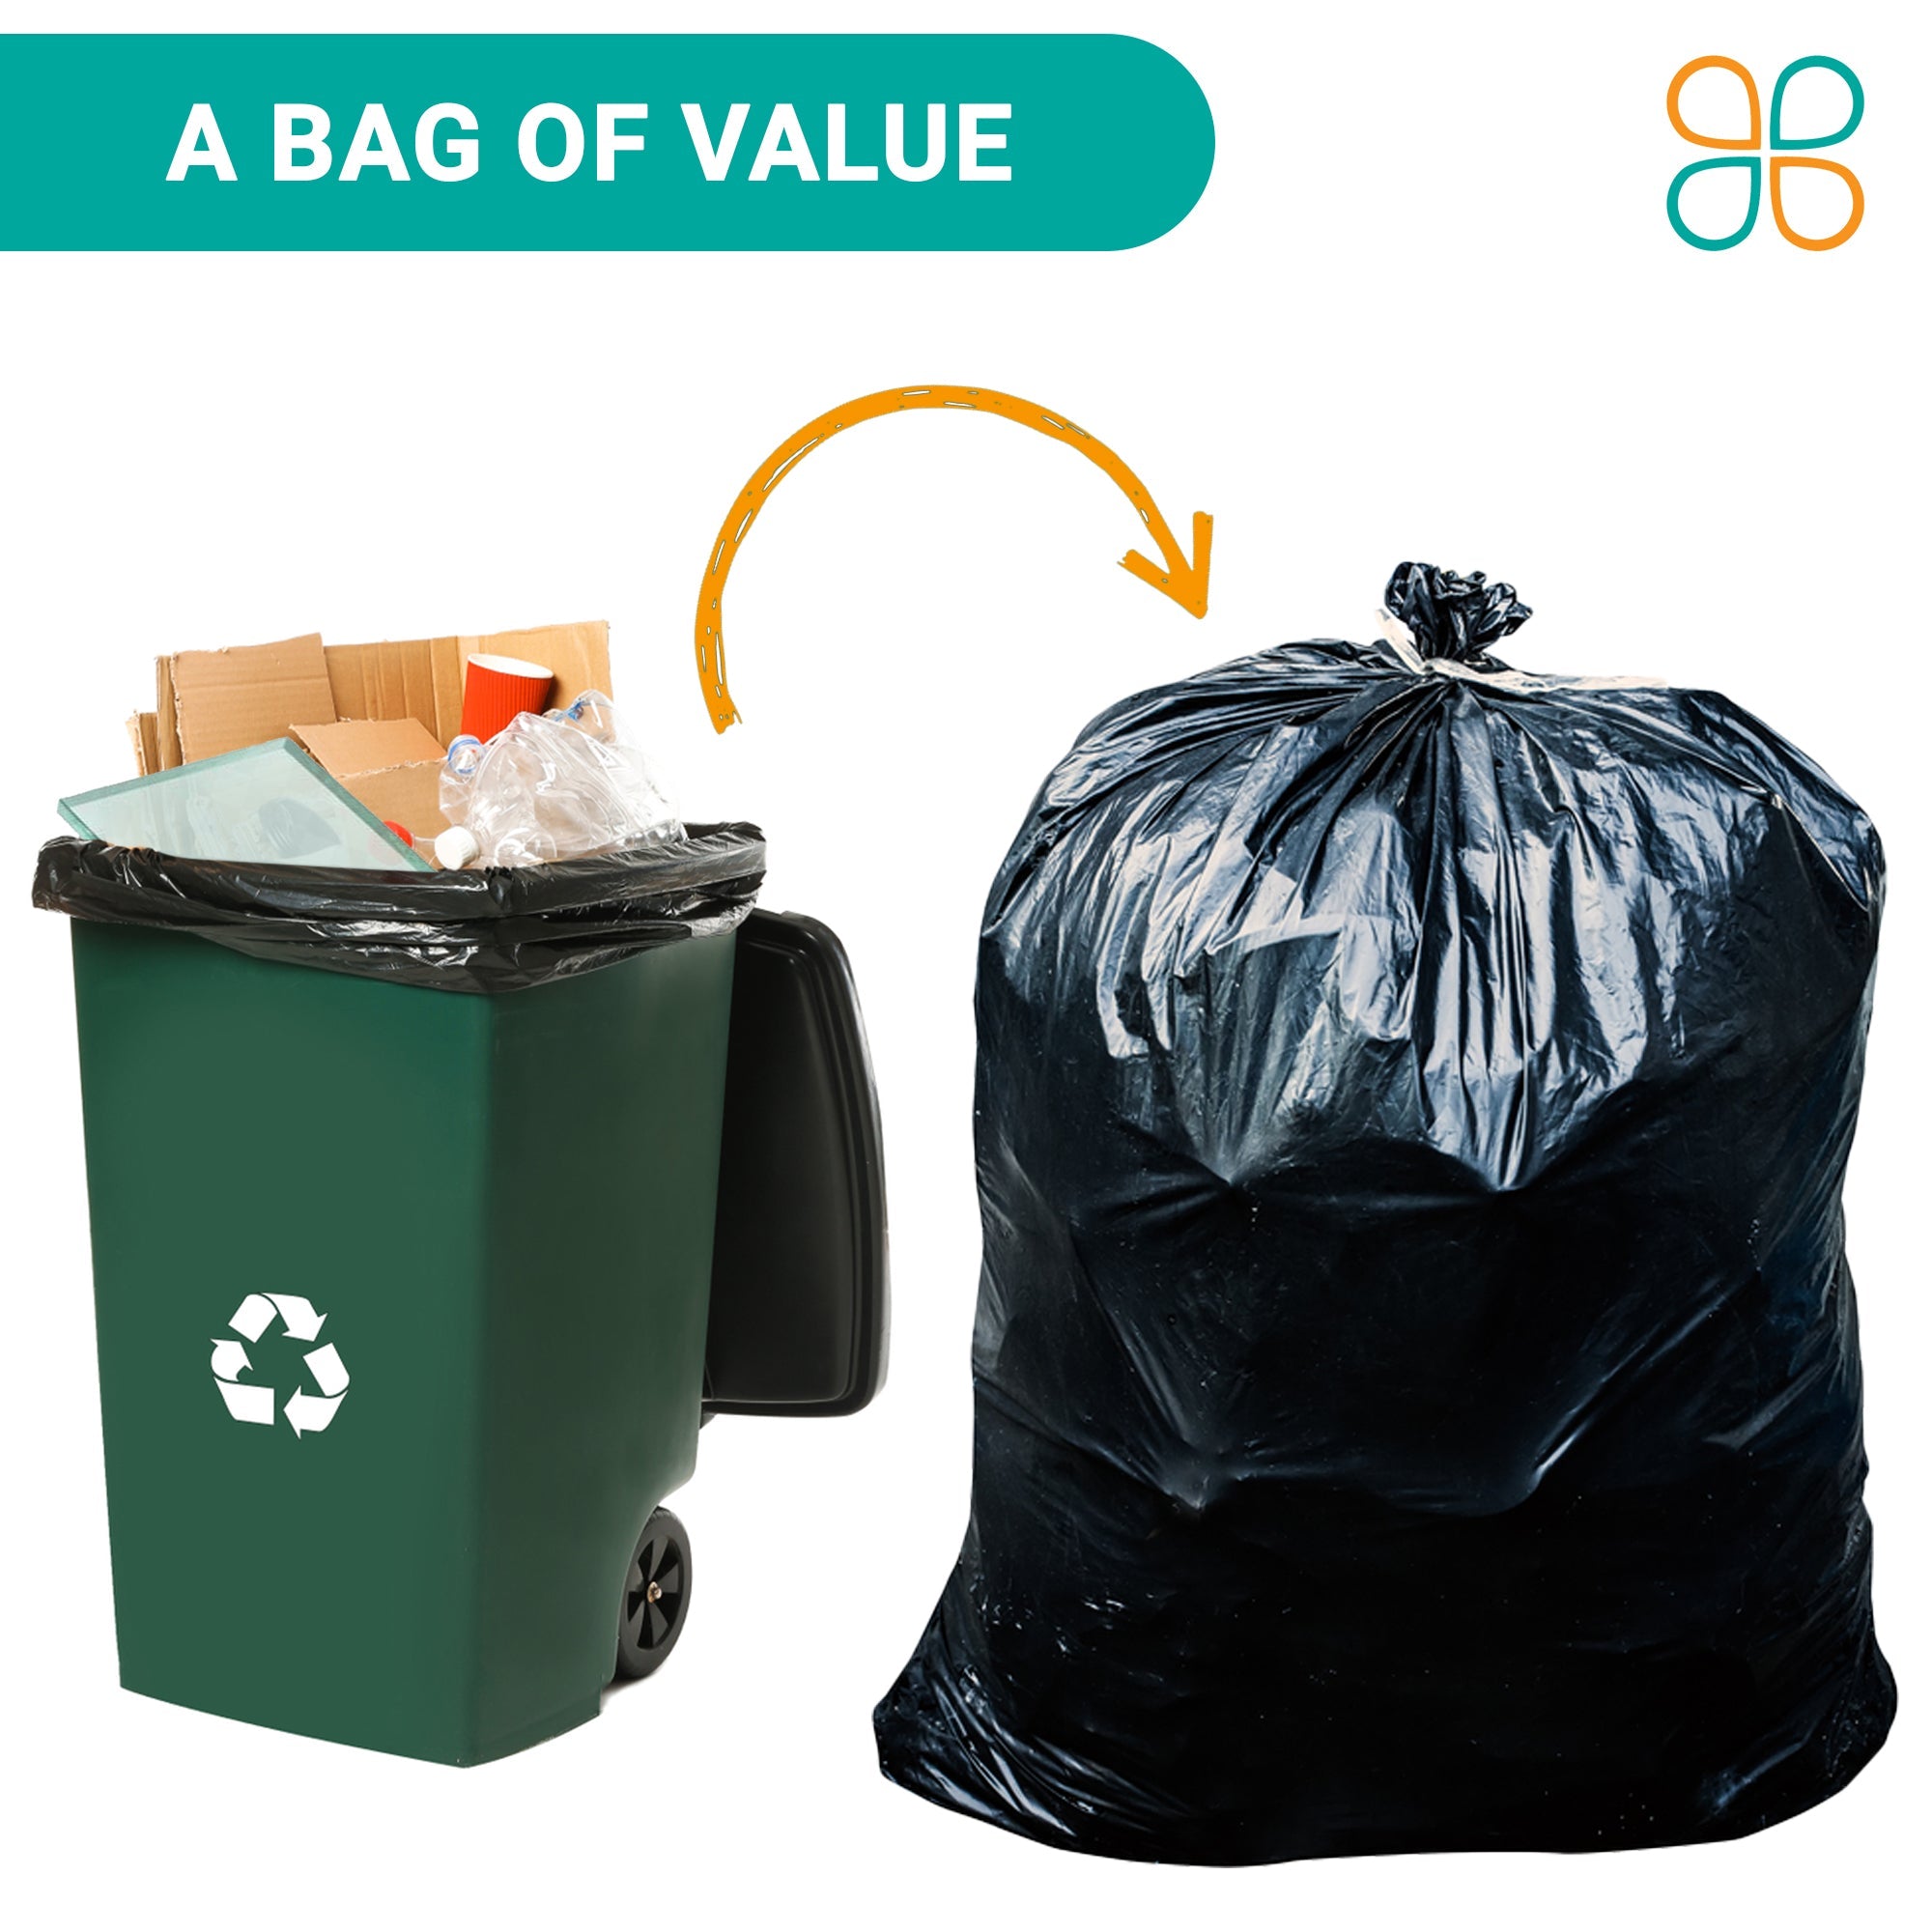 PlasticMill 50-60 Gallon Green 1.2 Mil 38x58 100 Bags/Case Garbage Bags / Trash Can Liners.